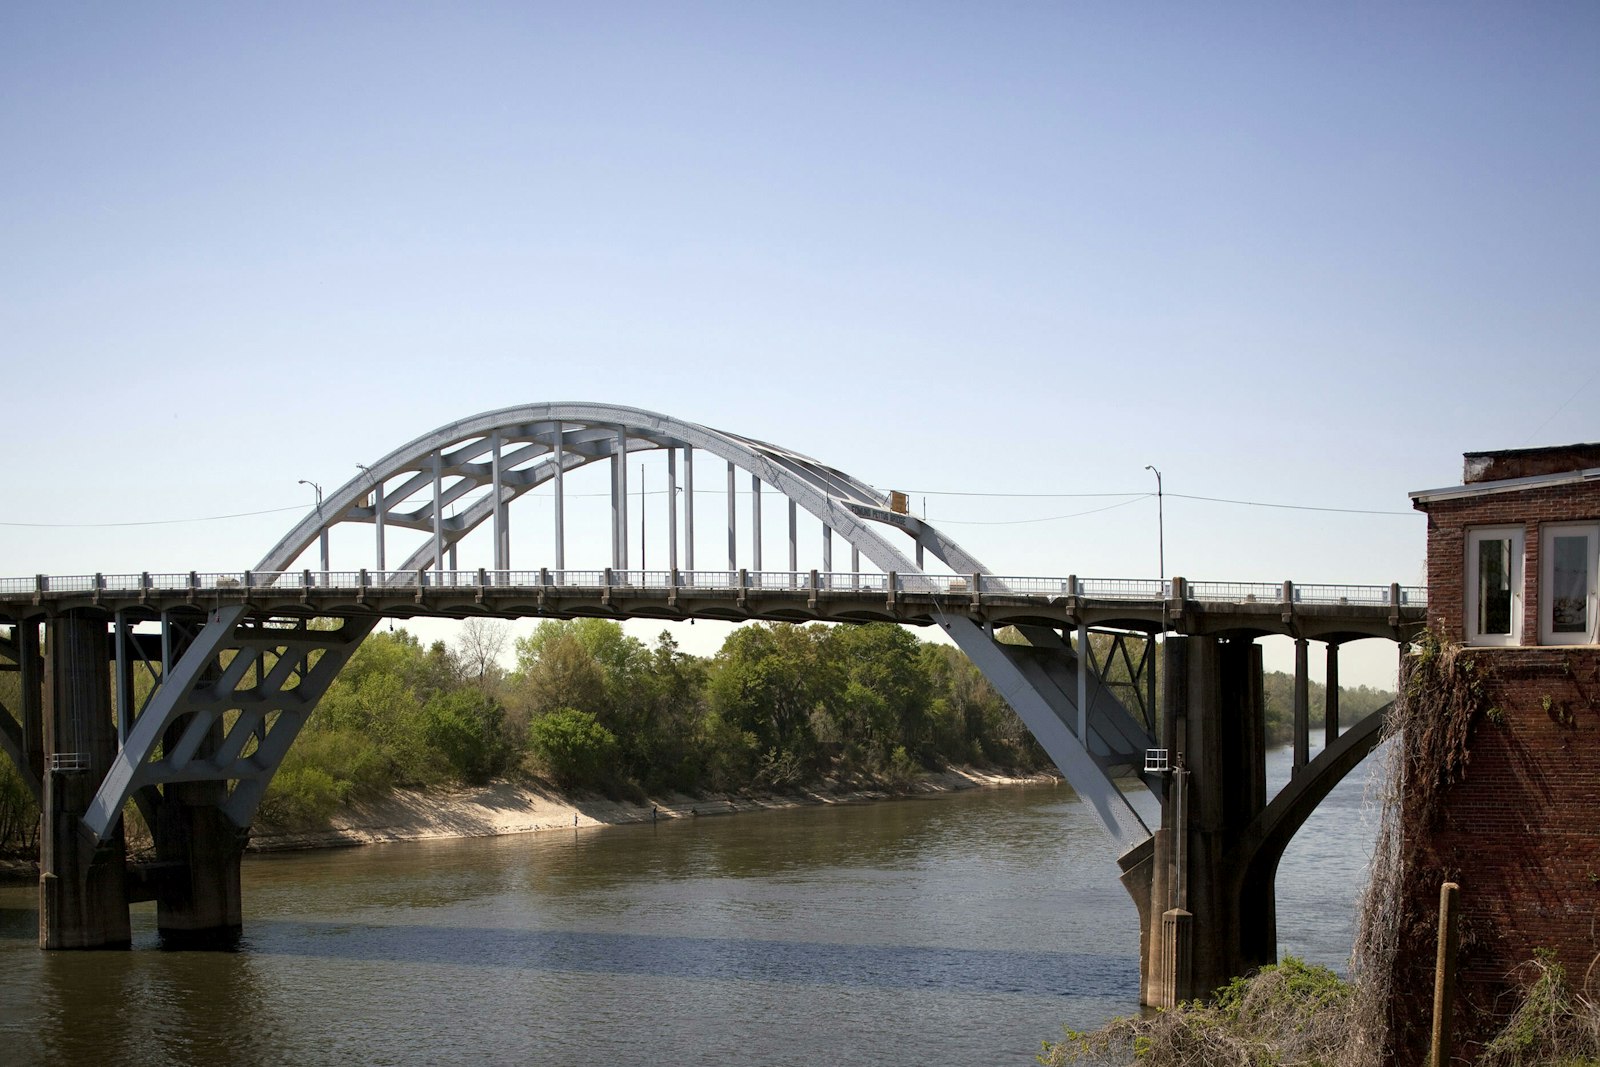 An arch winds over a steel bridge, over a river